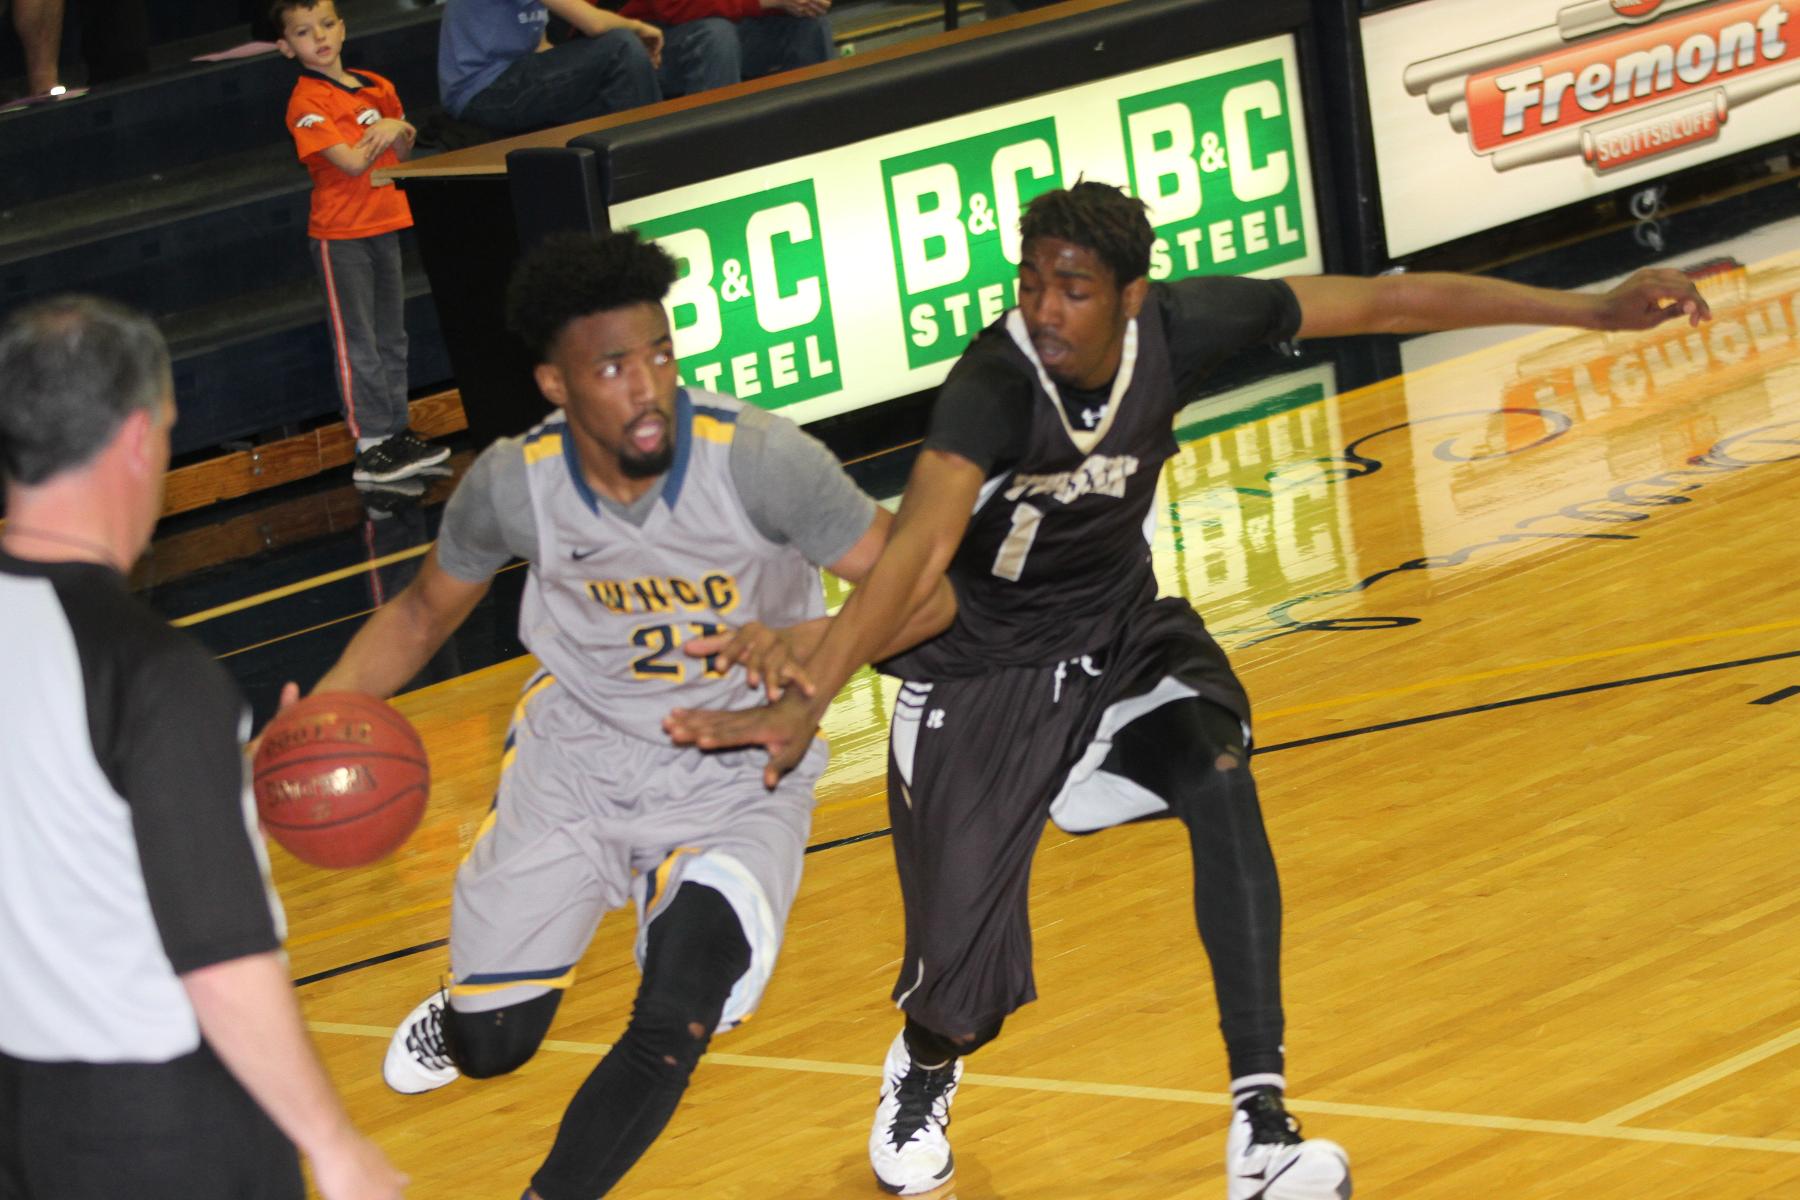 WNCC tops NJC 97-90 for 16th win of the season